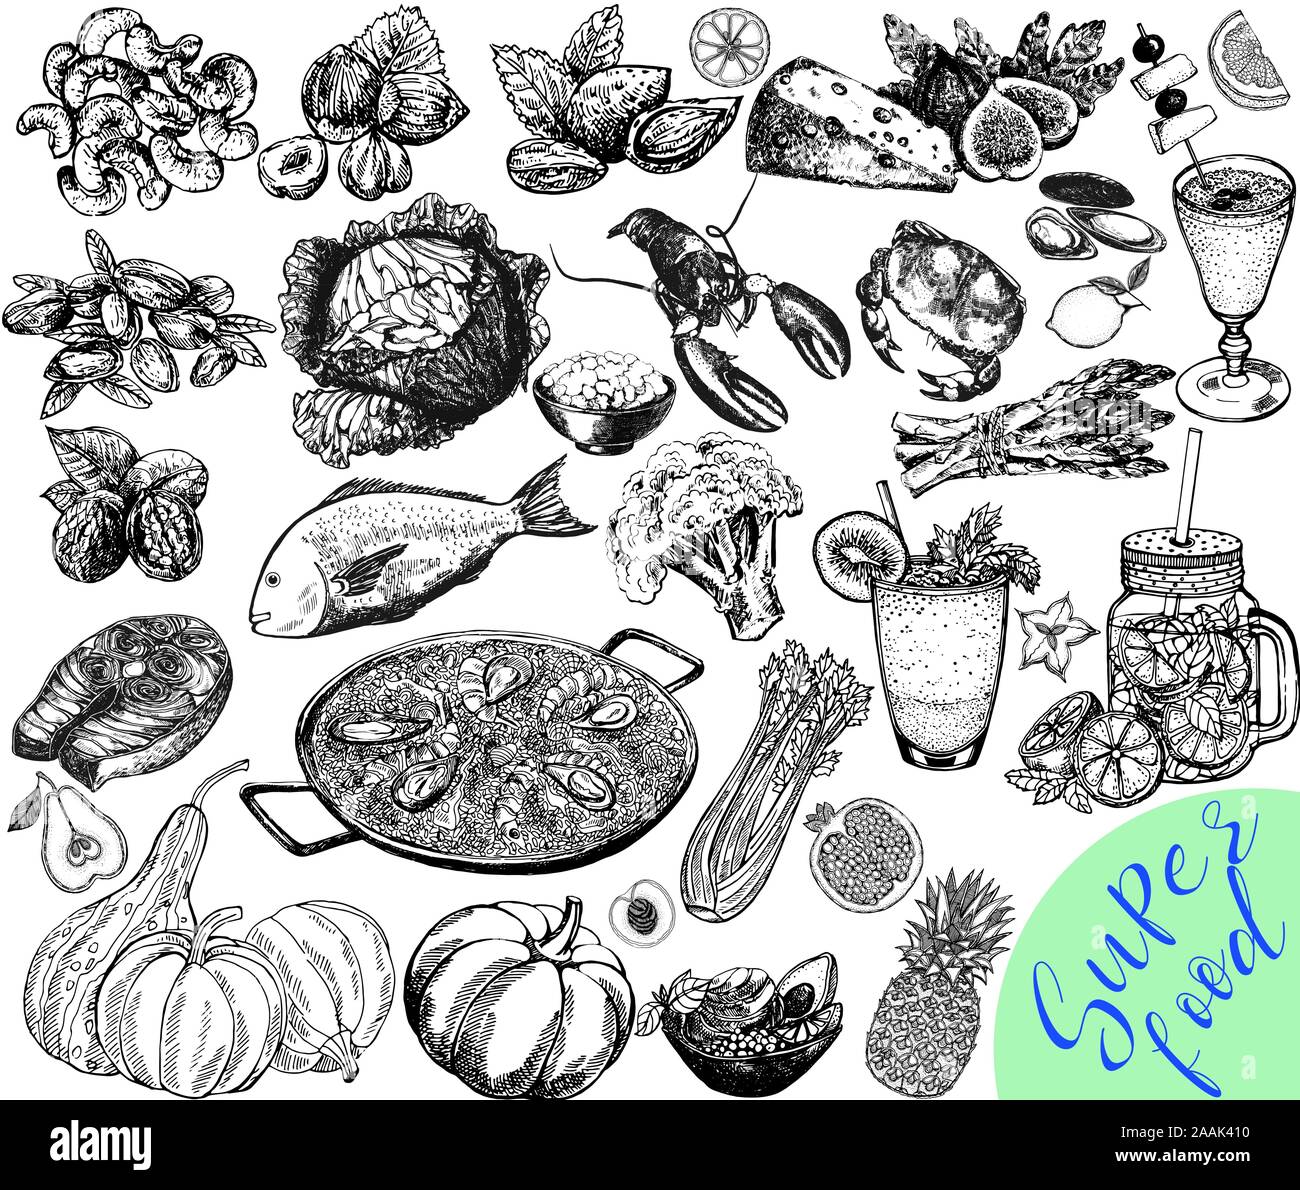 Big set of hand drawn sketch style different kinds of food and drinks isolated on white background. Vector illustration. Stock Vector